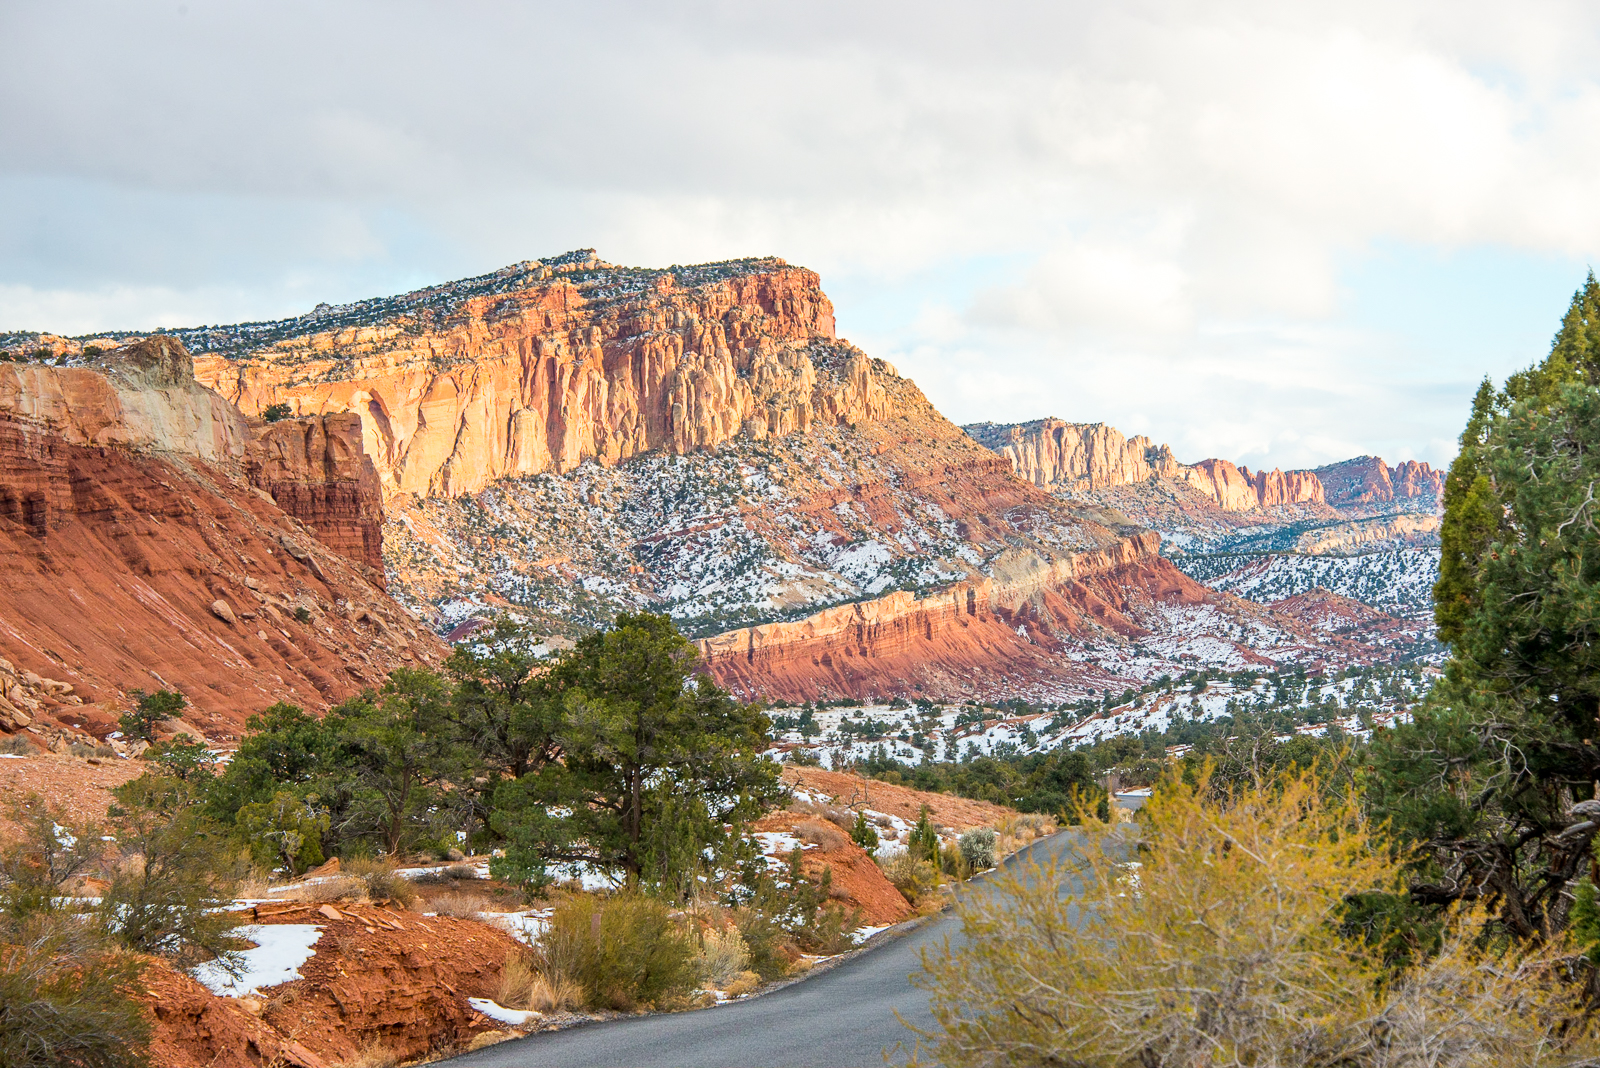 Large rock formations soar into the air, filling the skyline at Utah's Capitol Reef National Park